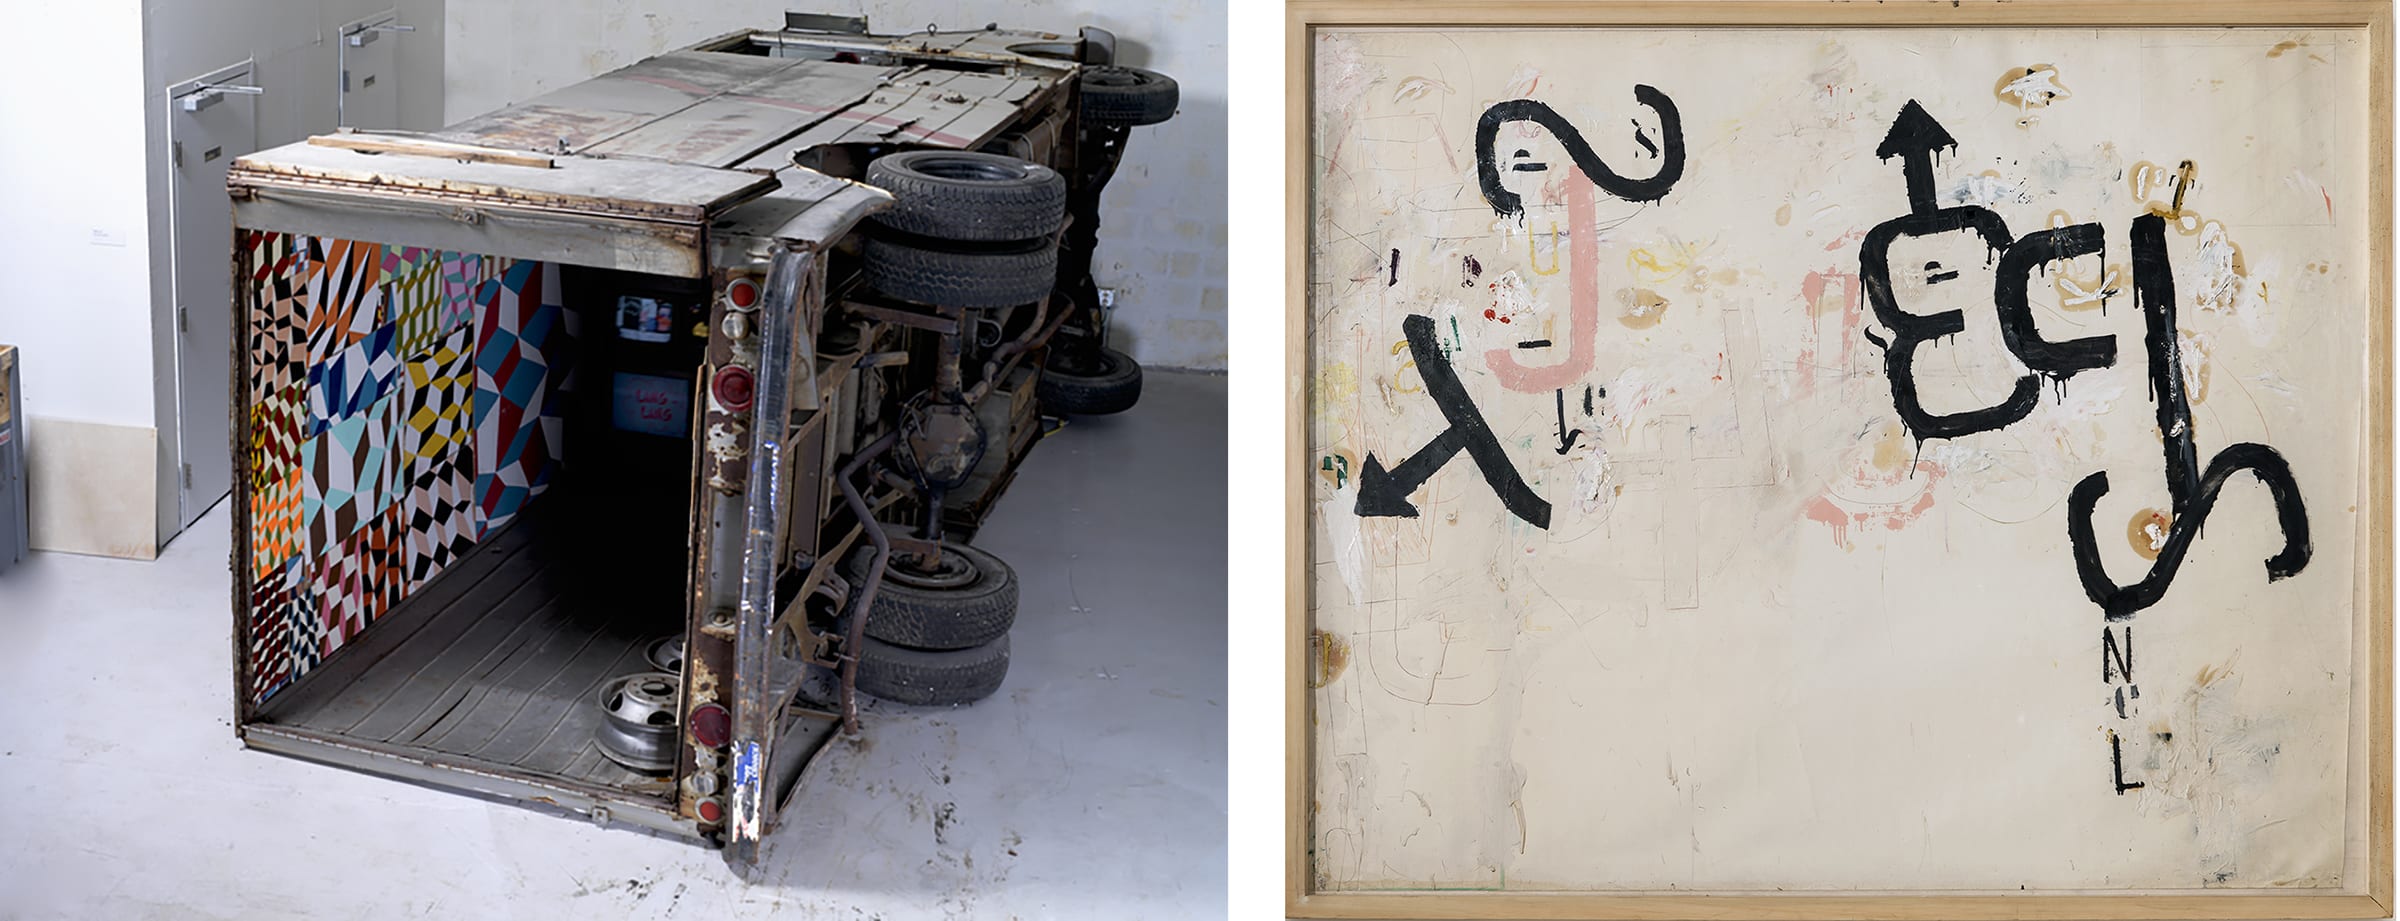 Left: Barry McGee, Untitled (truck installation with TVs), 2004. Right: Jannis Kounellis, Untitled, 1960. Both images: Collection Martin Z. Margulies